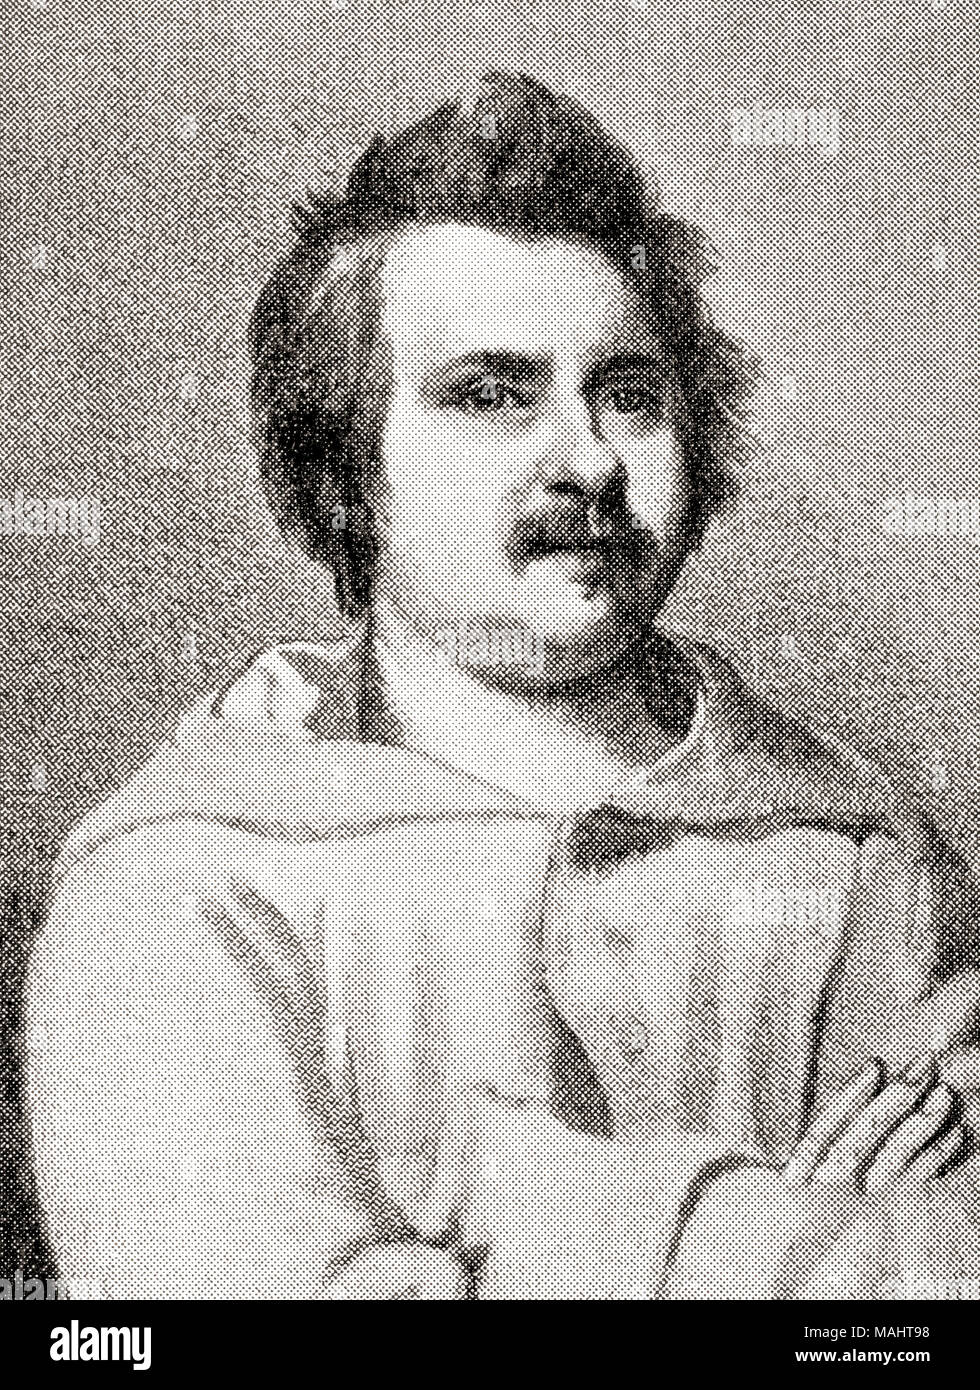 Honoré de Balzac, 1799 – 1850.  French novelist and playwright.  From Hutchinson's History of the Nations, published 1915 Stock Photo